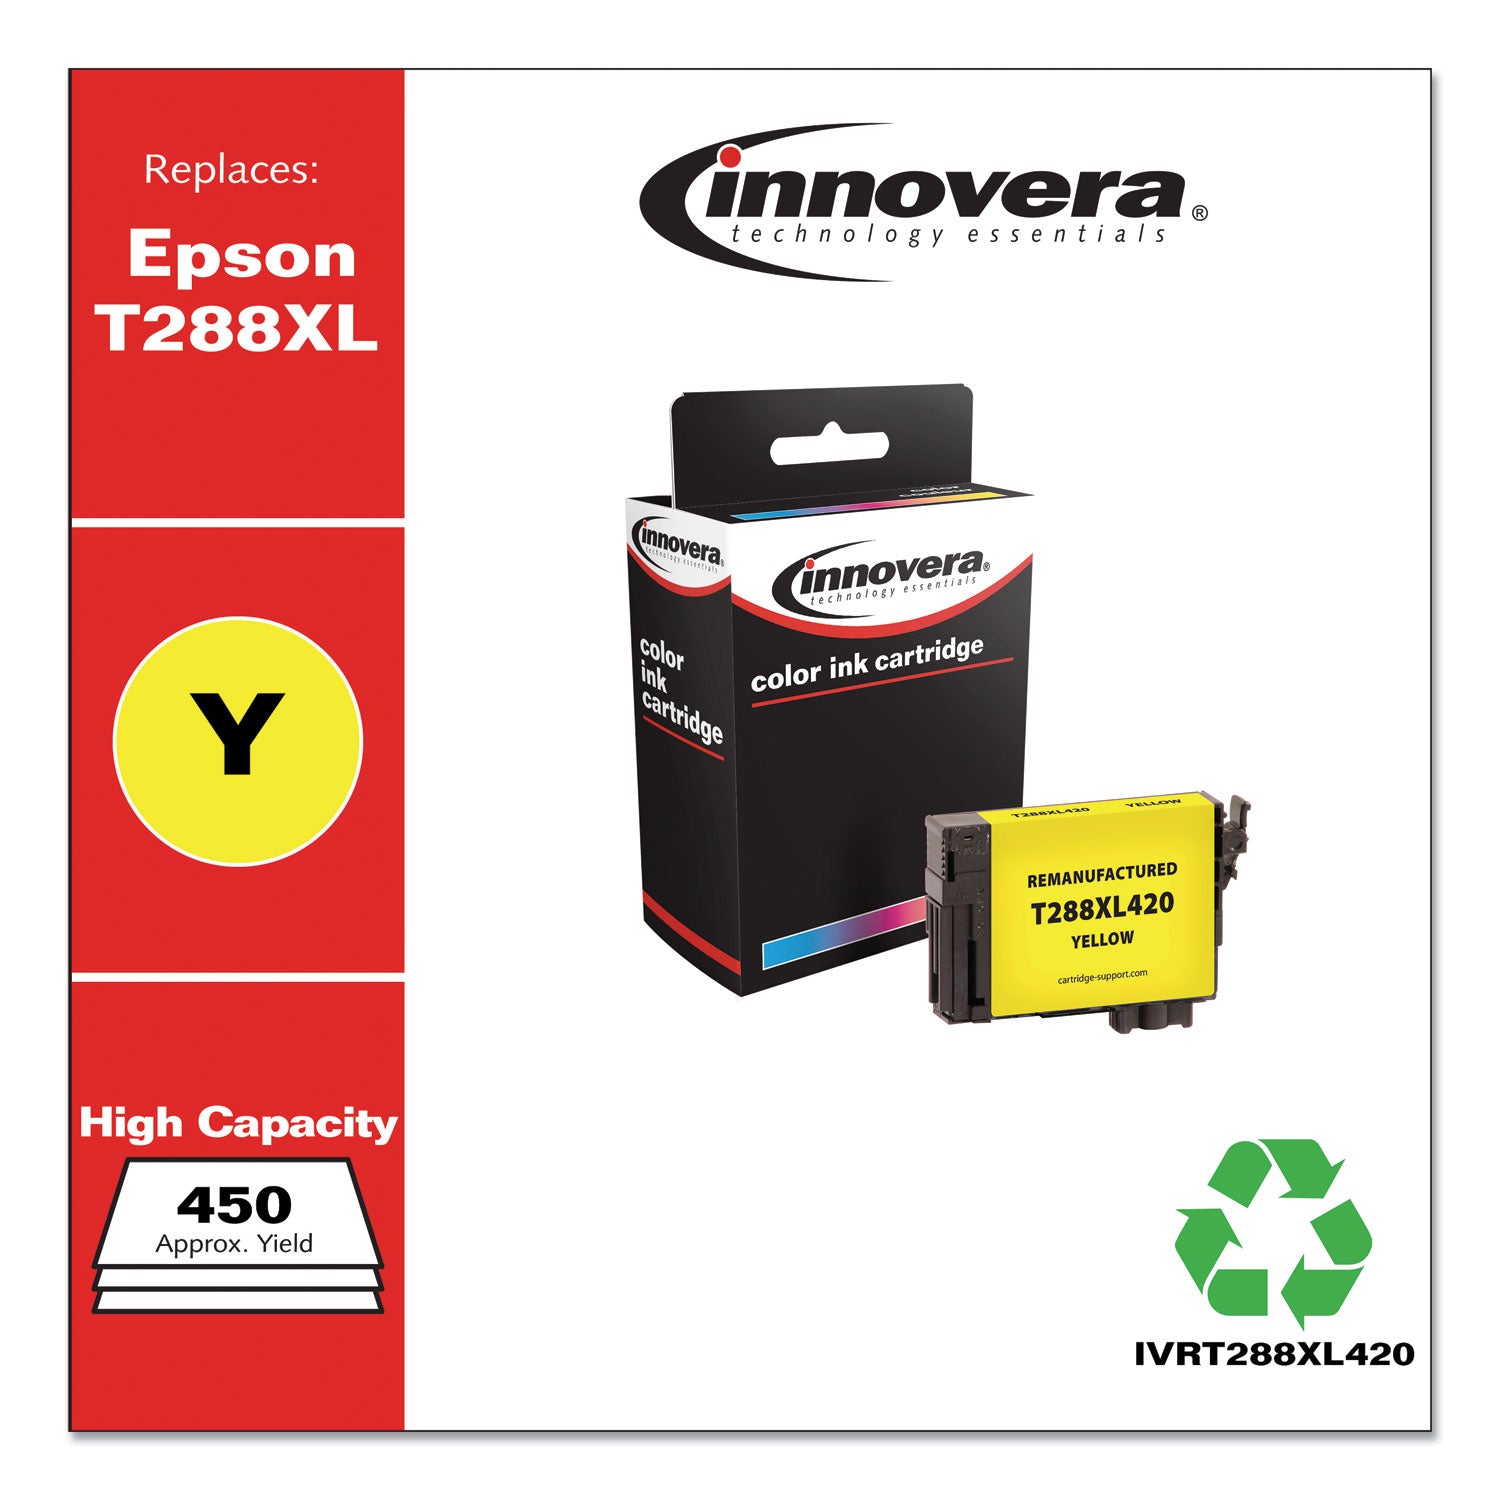 remanufactured-yellow-high-yield-ink-replacement-for-t288xl-t288xl420-450-page-yield_ivrt288xl420 - 2